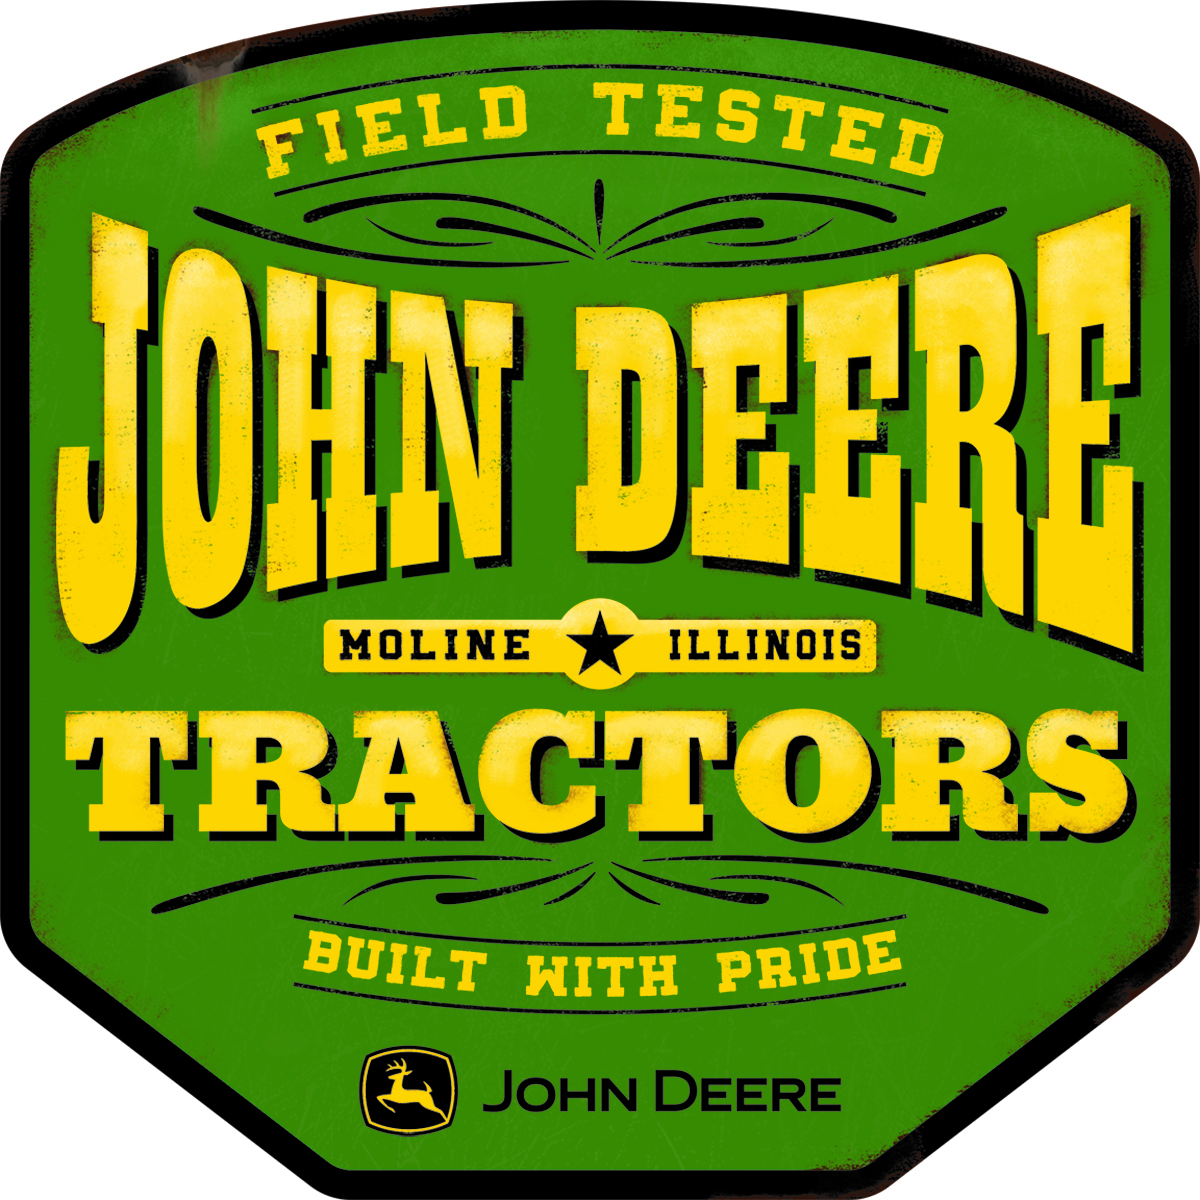 Field Tested Tractor Metal Sign